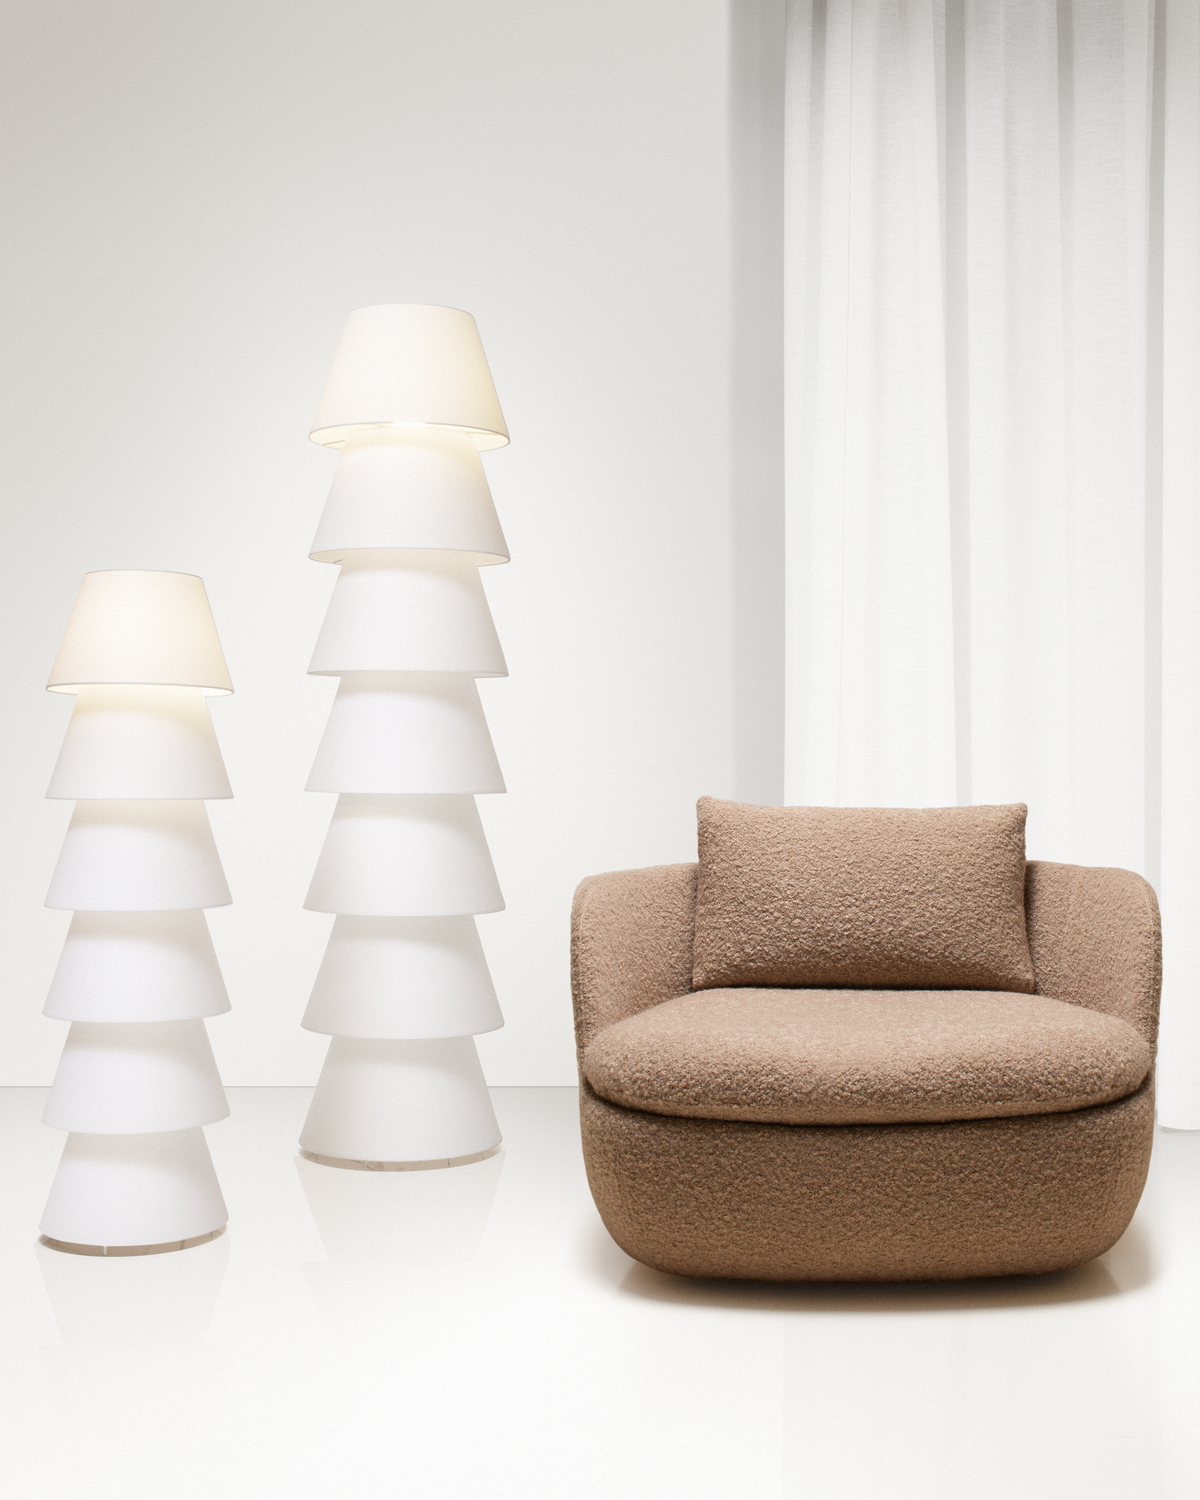 Poetic composition Set Up Shades floor light and Bart Armchair